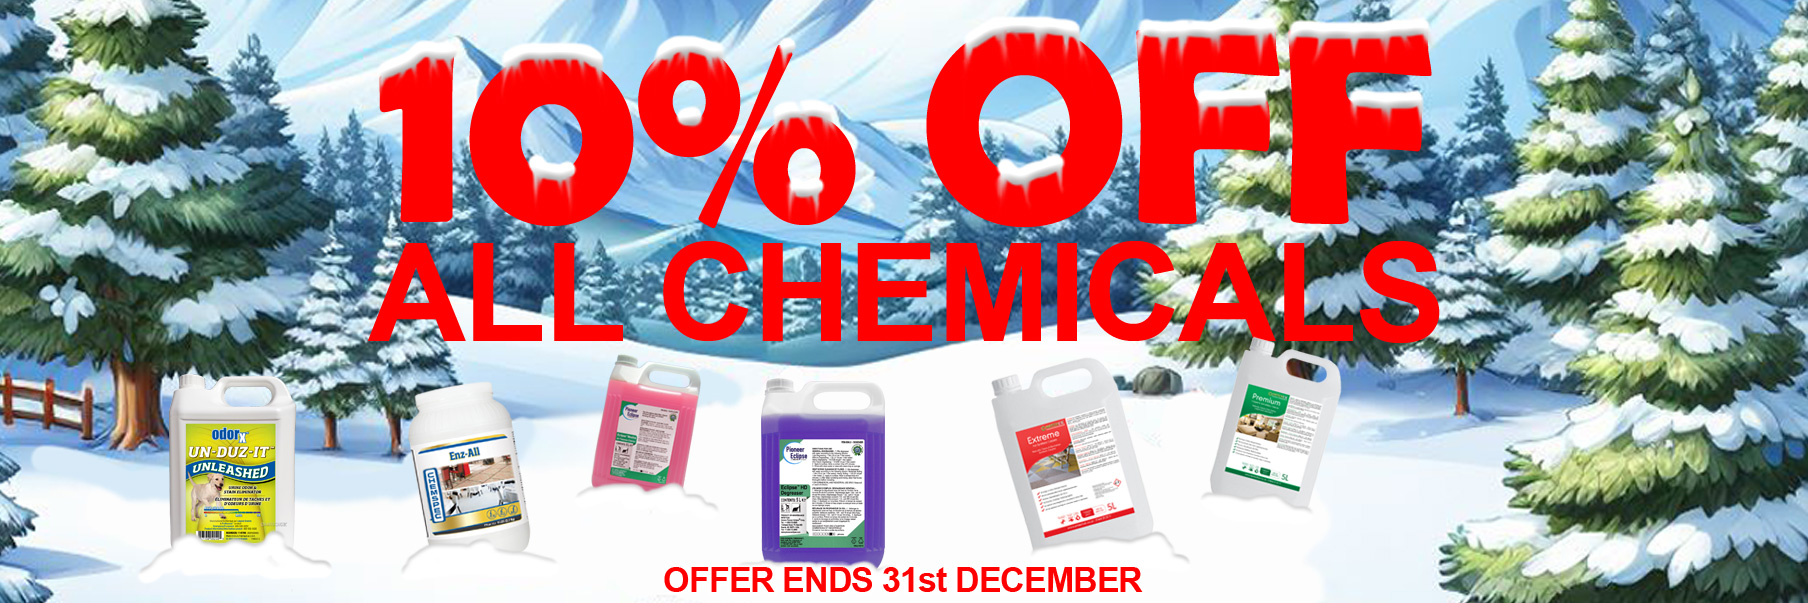 10% OFF All Chemicals